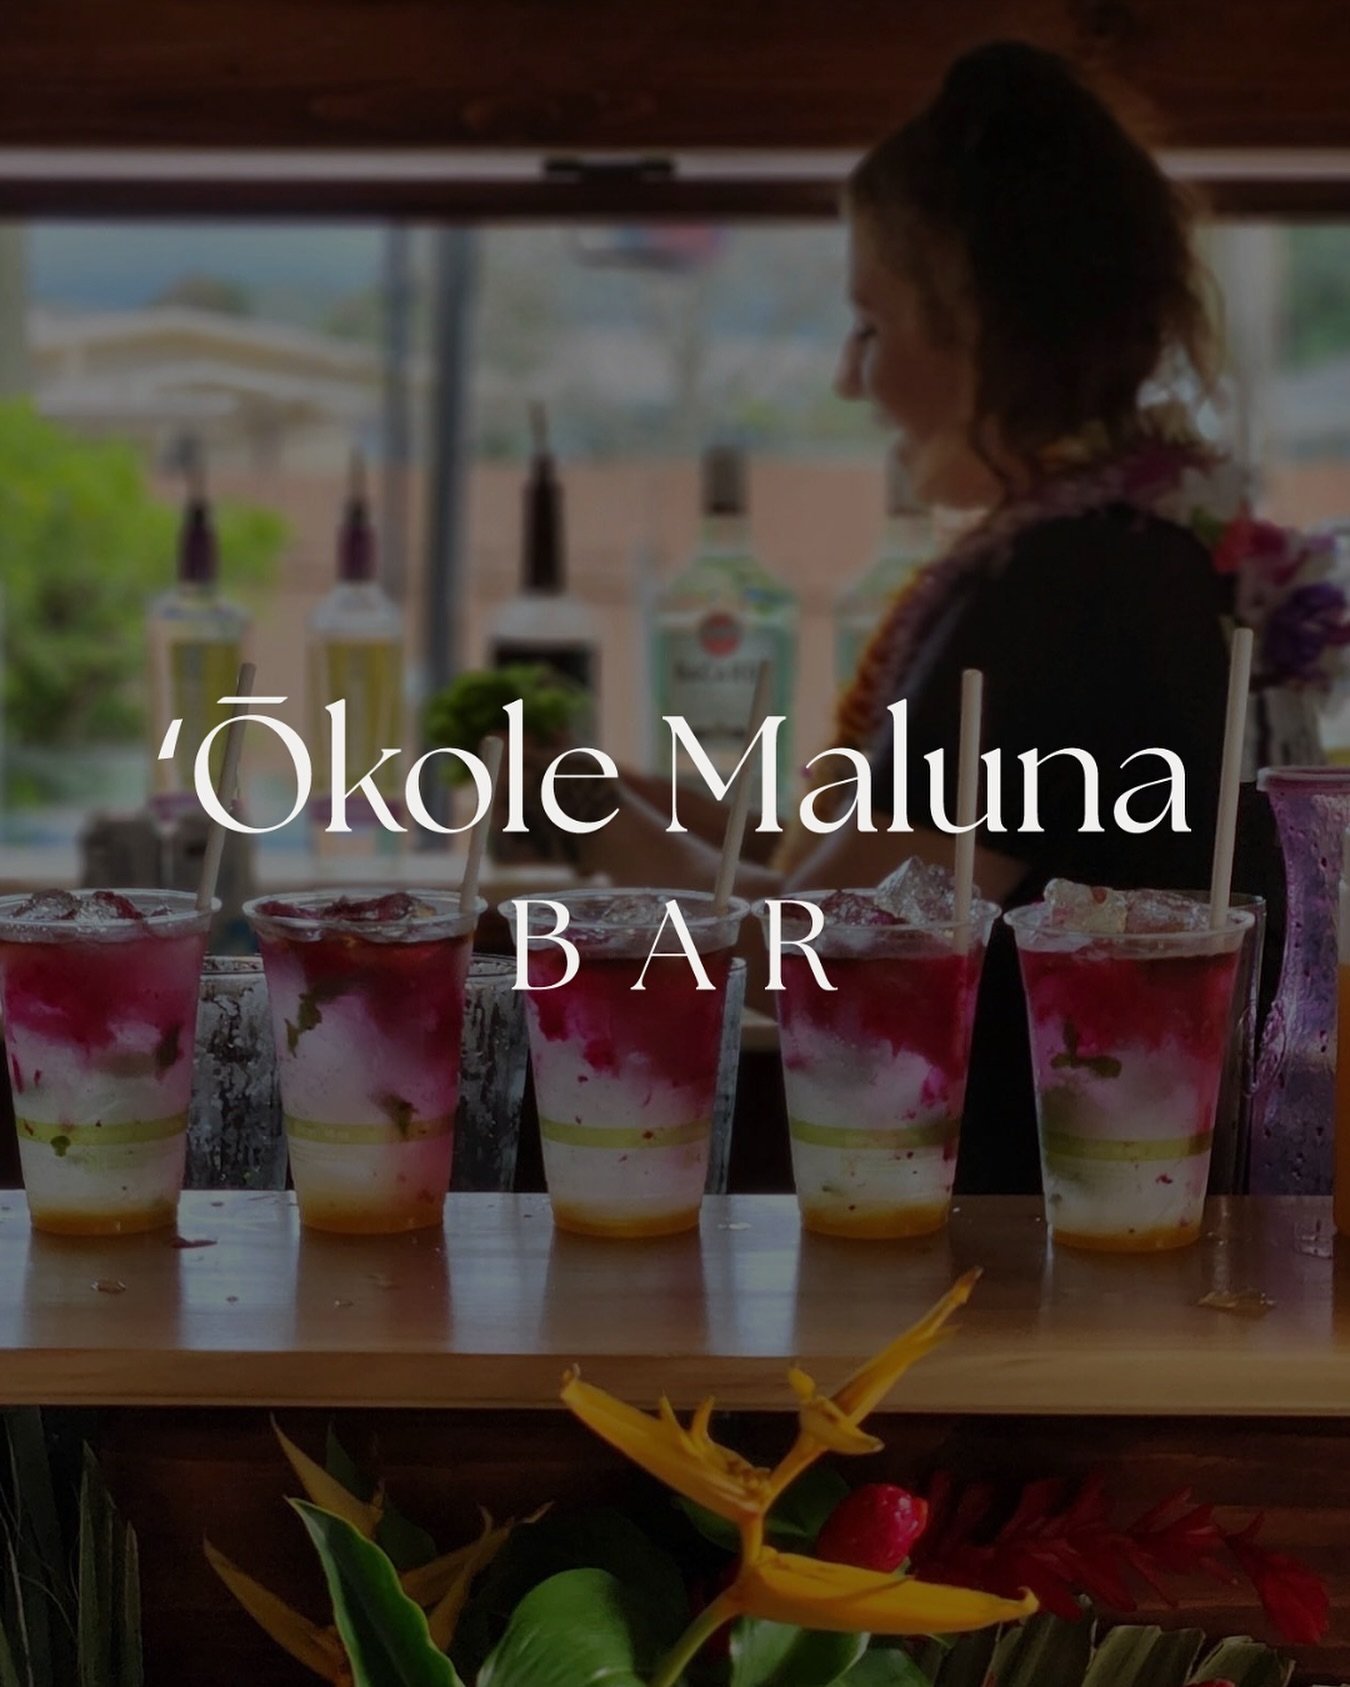 MIXOLOGY + MOBILE BAR SERVICE

We offer a complete bar service stocked with homemade purees, premium mixers, and photo-worthy garnishes, ensuring that guests can enjoy their favorite drinks made to perfection.

The bartenders at @okolemalunabar are e